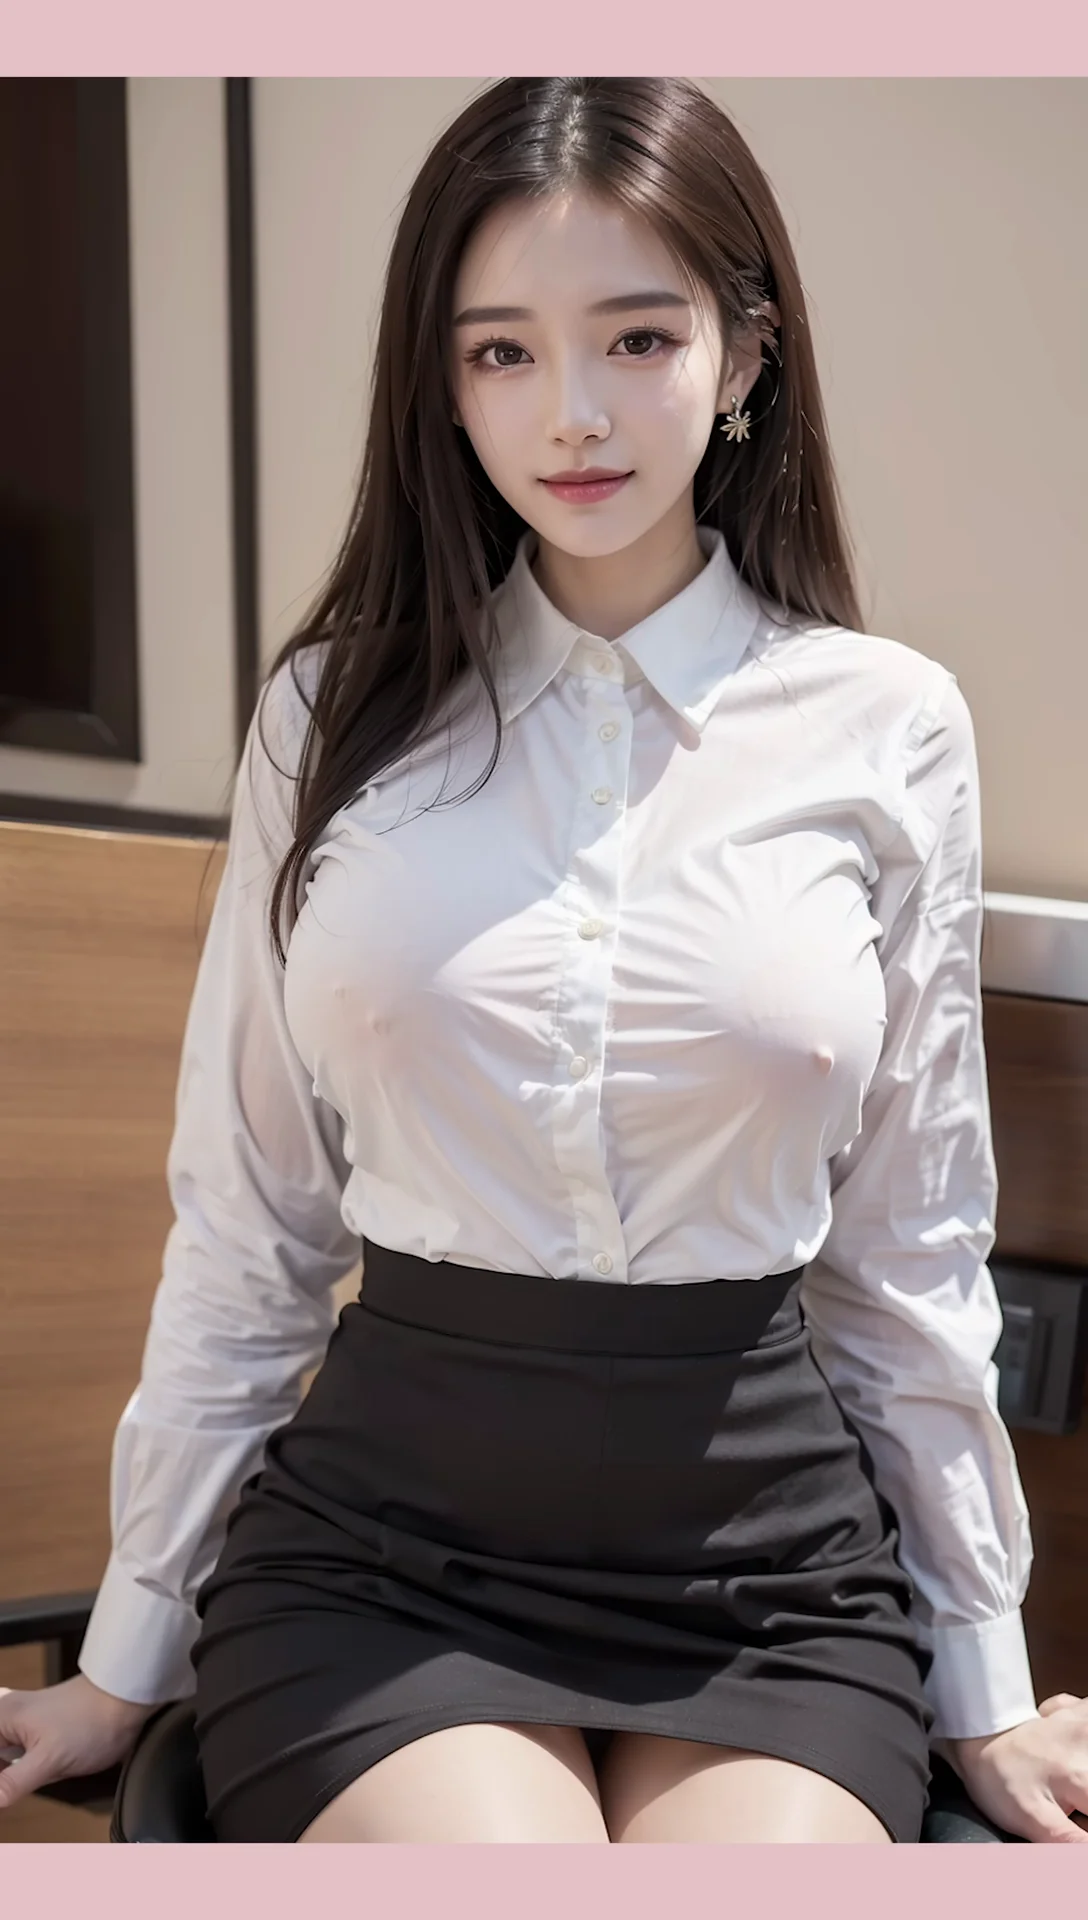 Ai Lookbook: Sexy Office Woman Images 33